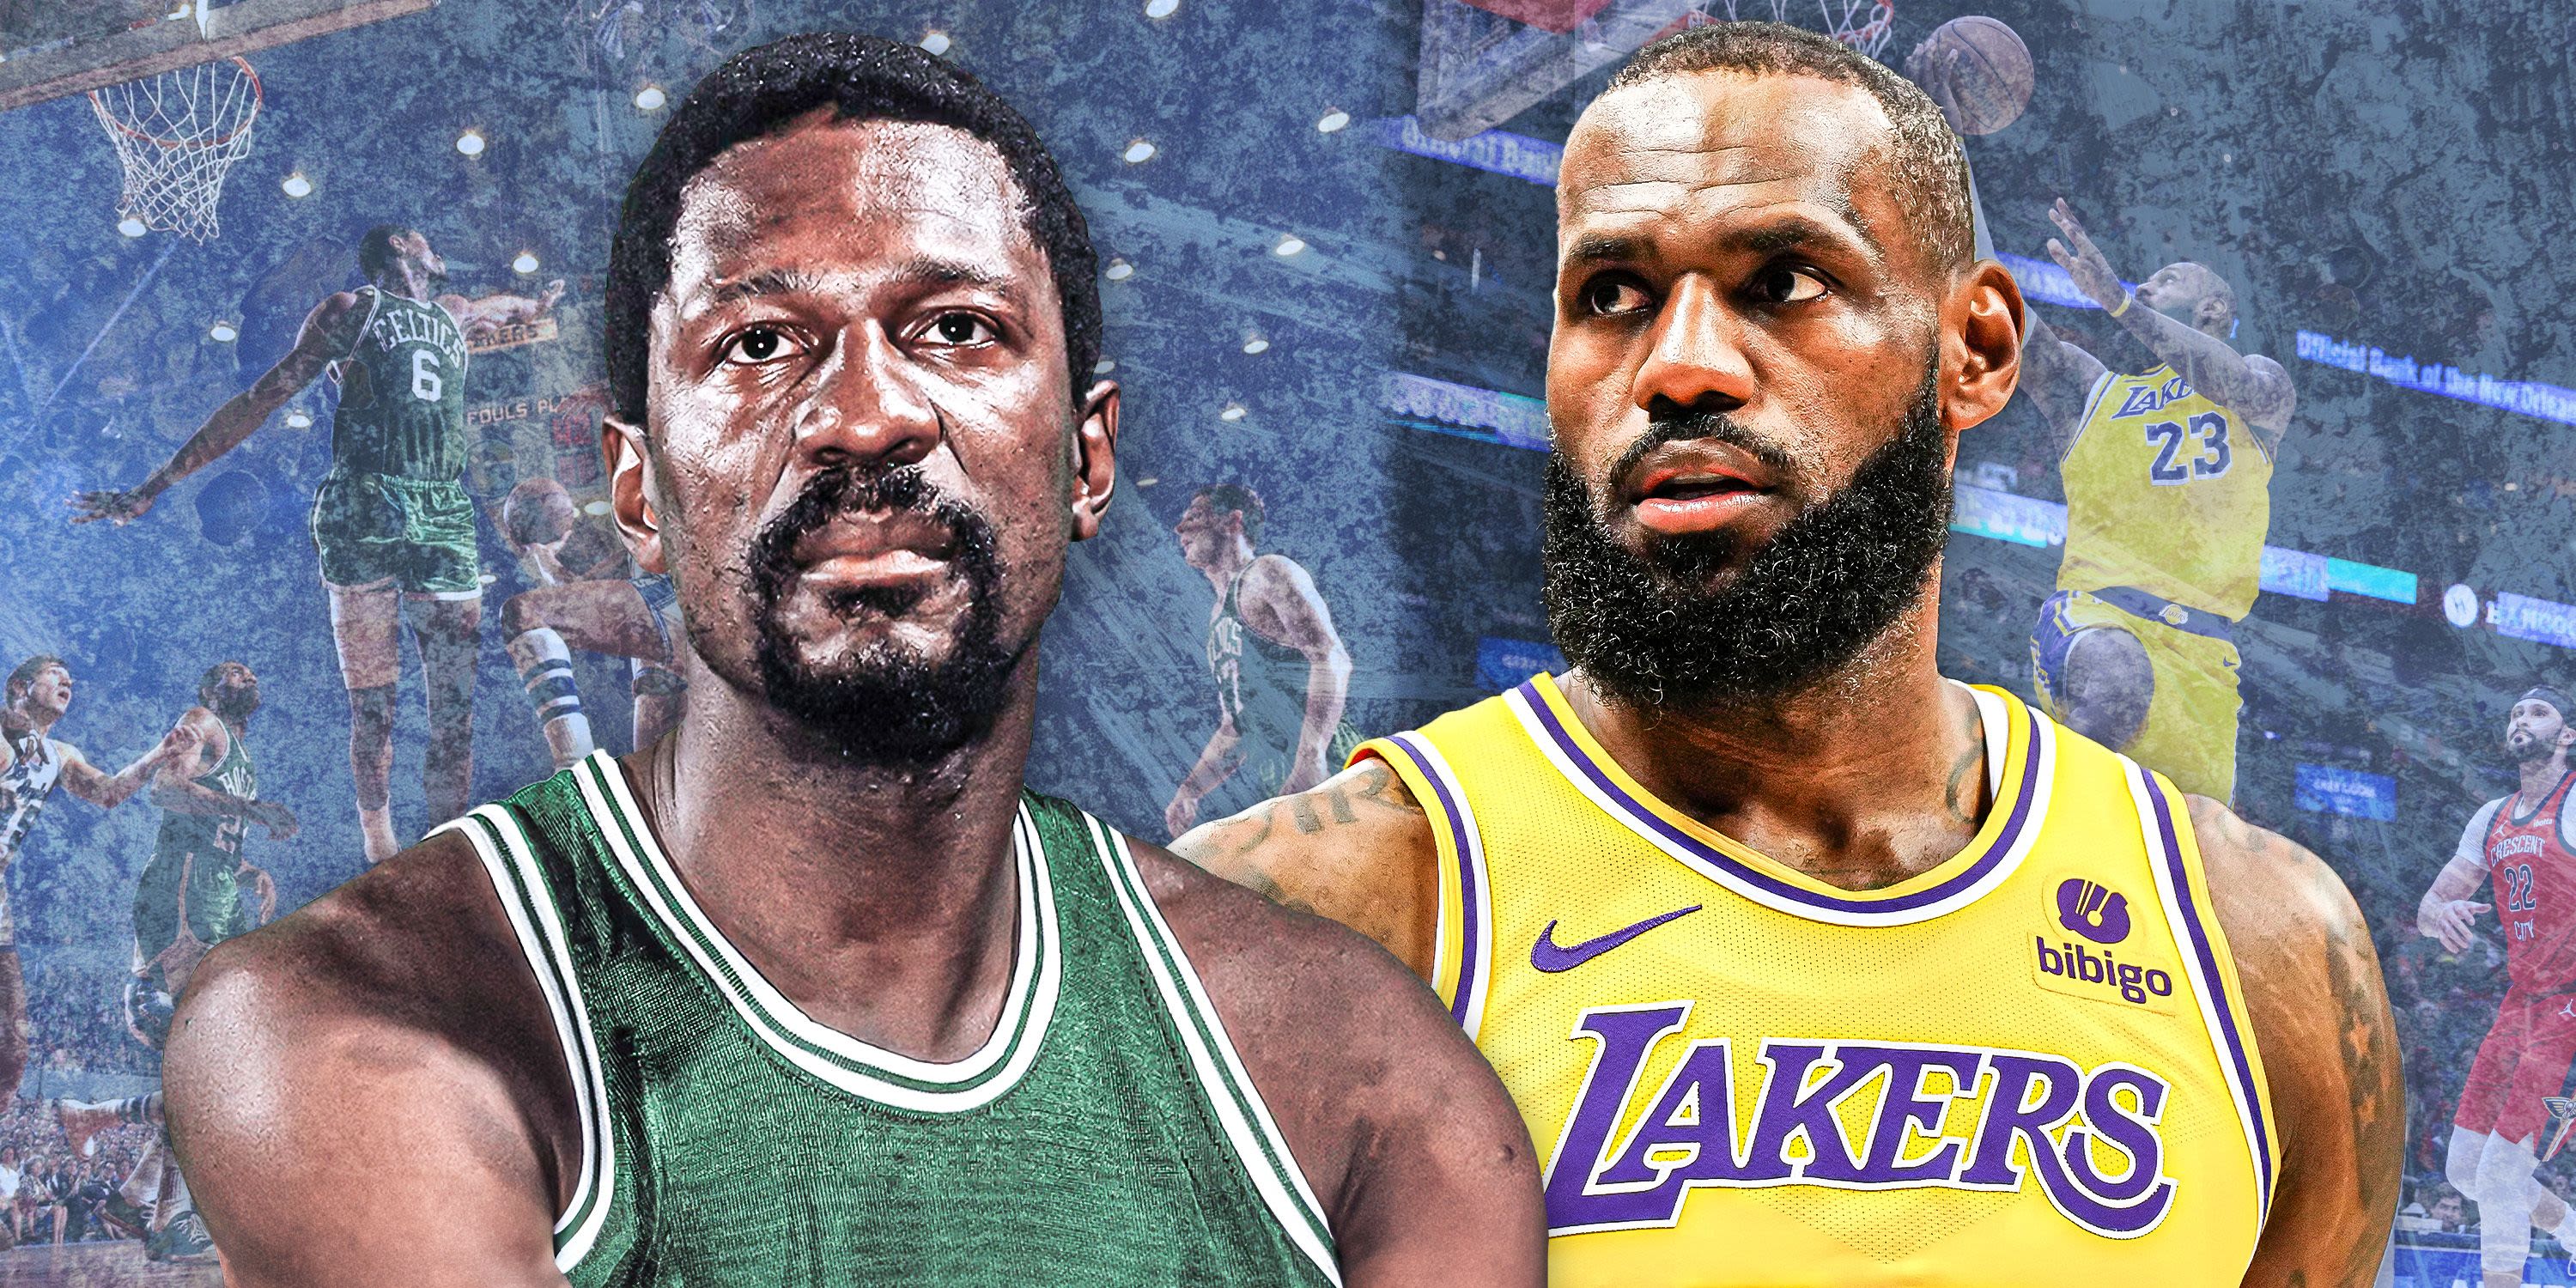 10 NBA Players Who Would Dominate in Any Era